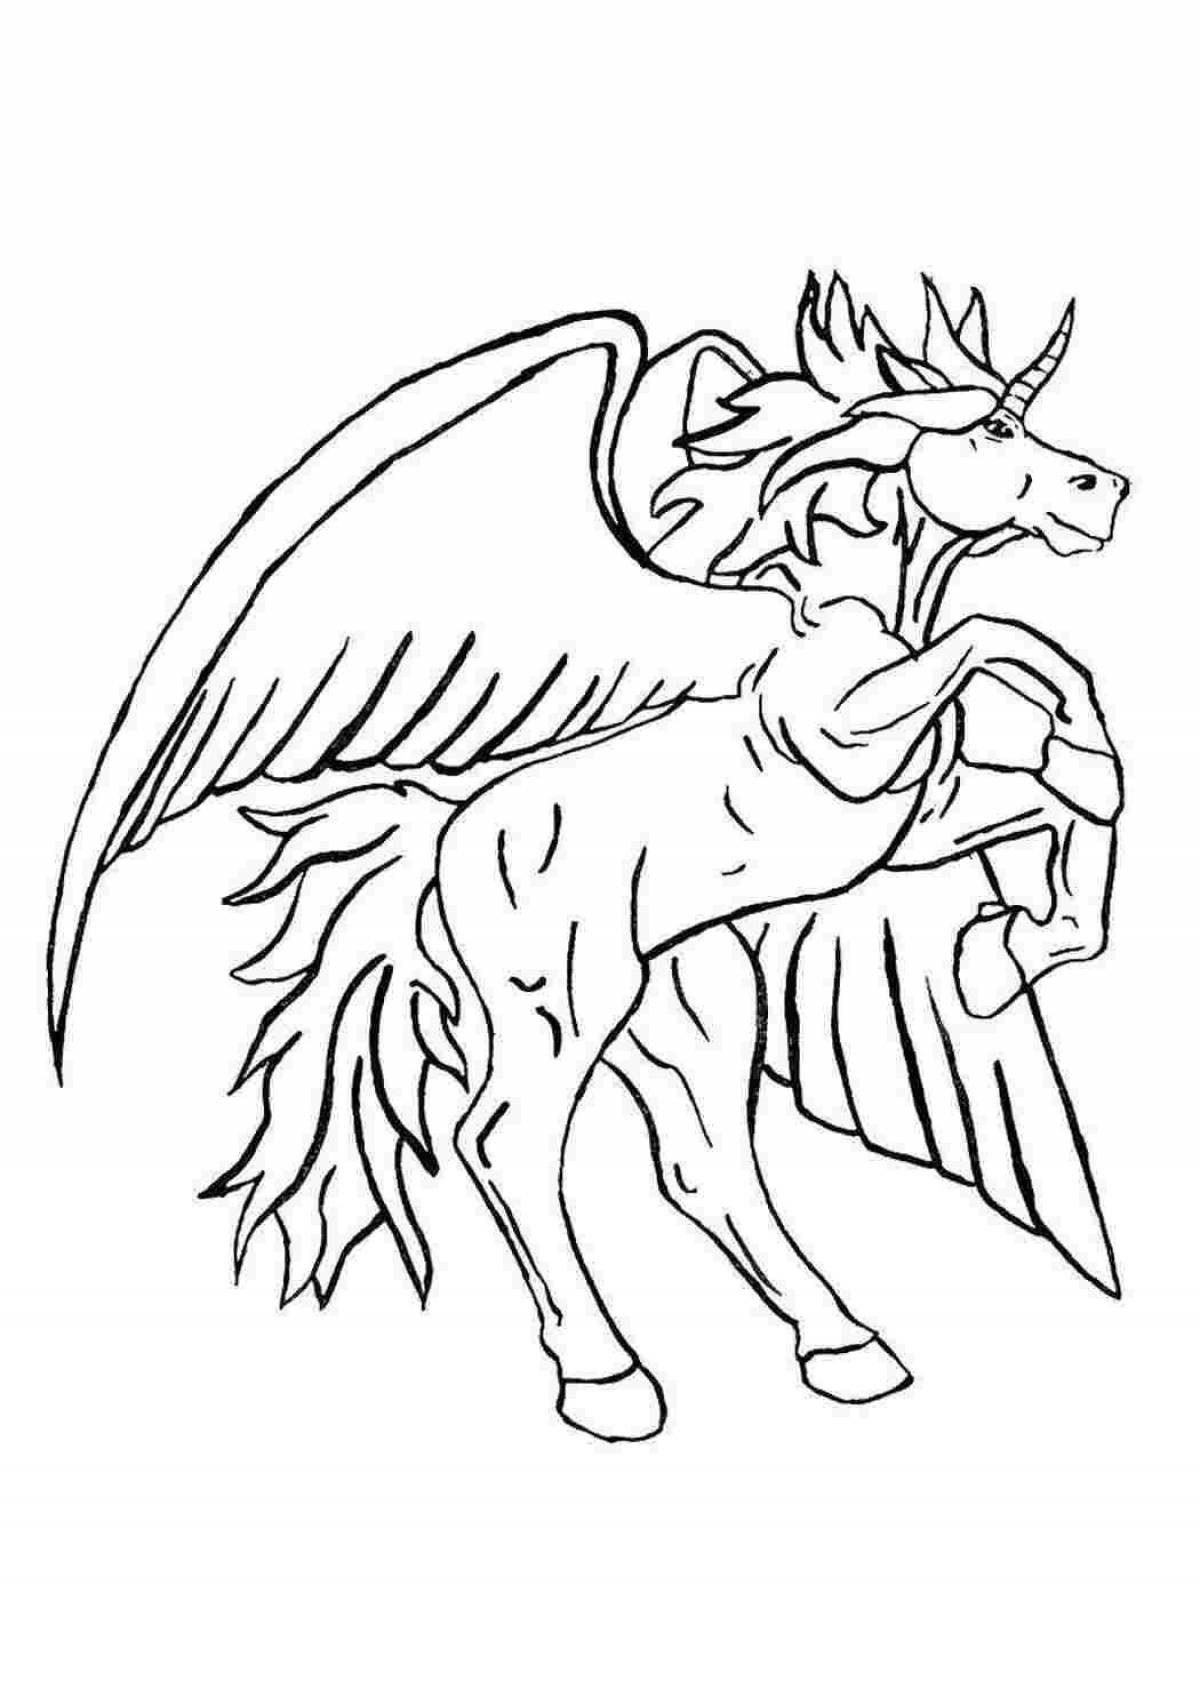 Sparkly Pegasus coloring book for kids